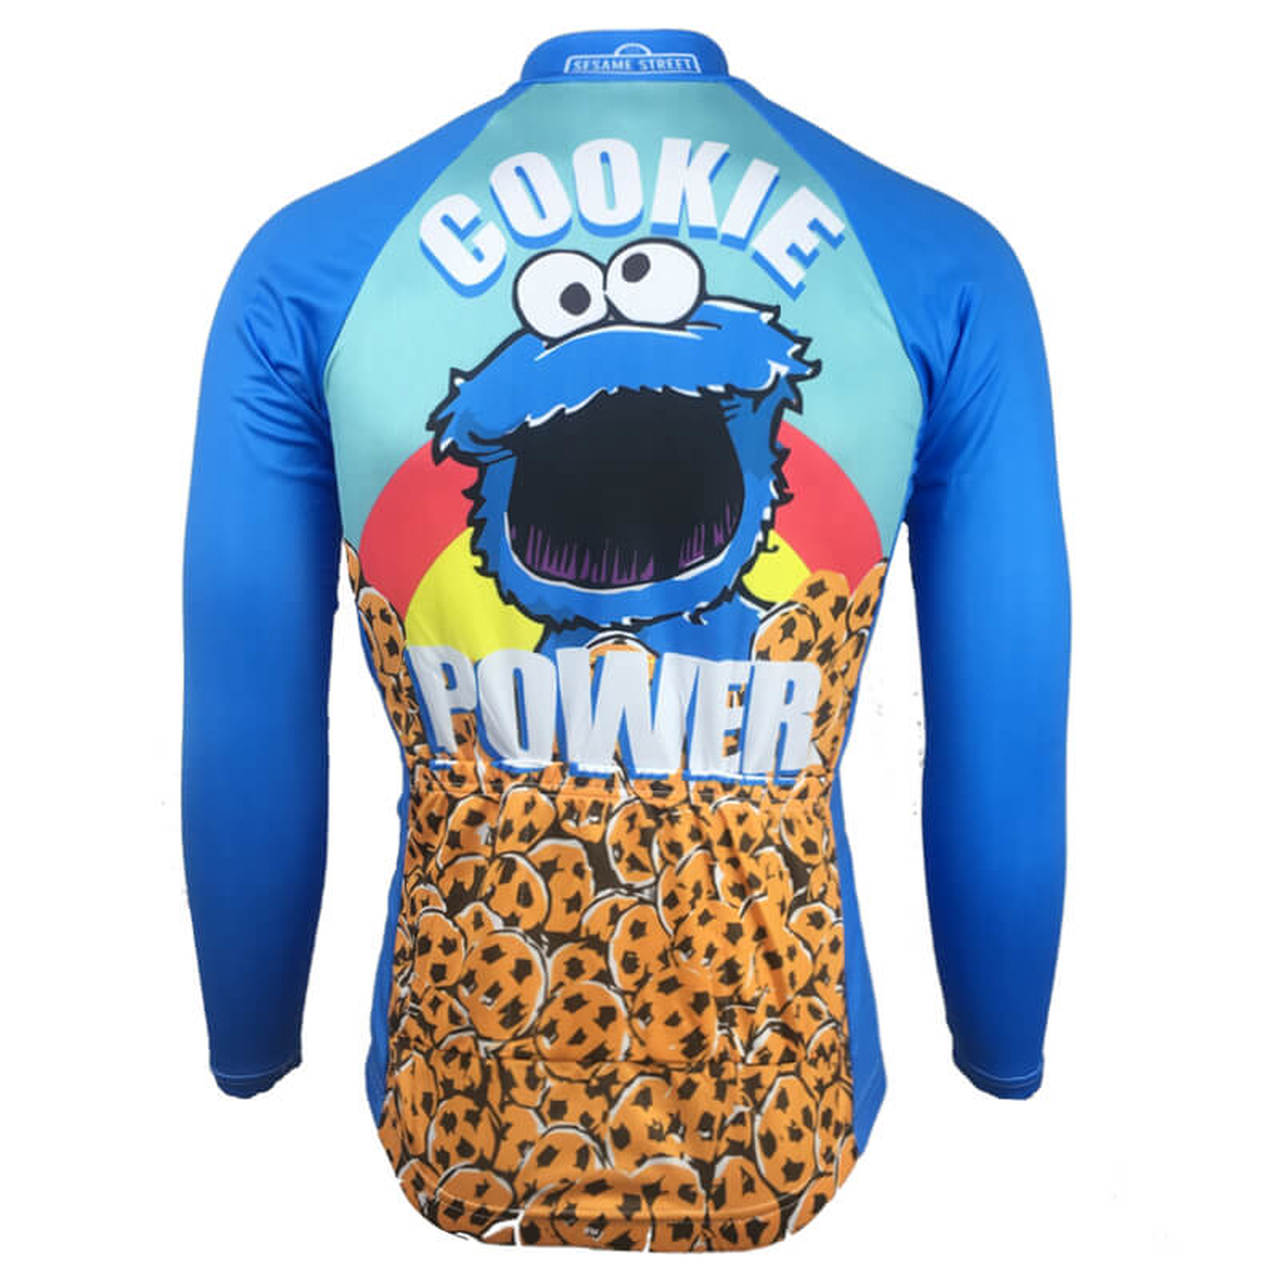 Cookie Power Long Cycling Jersey Rear